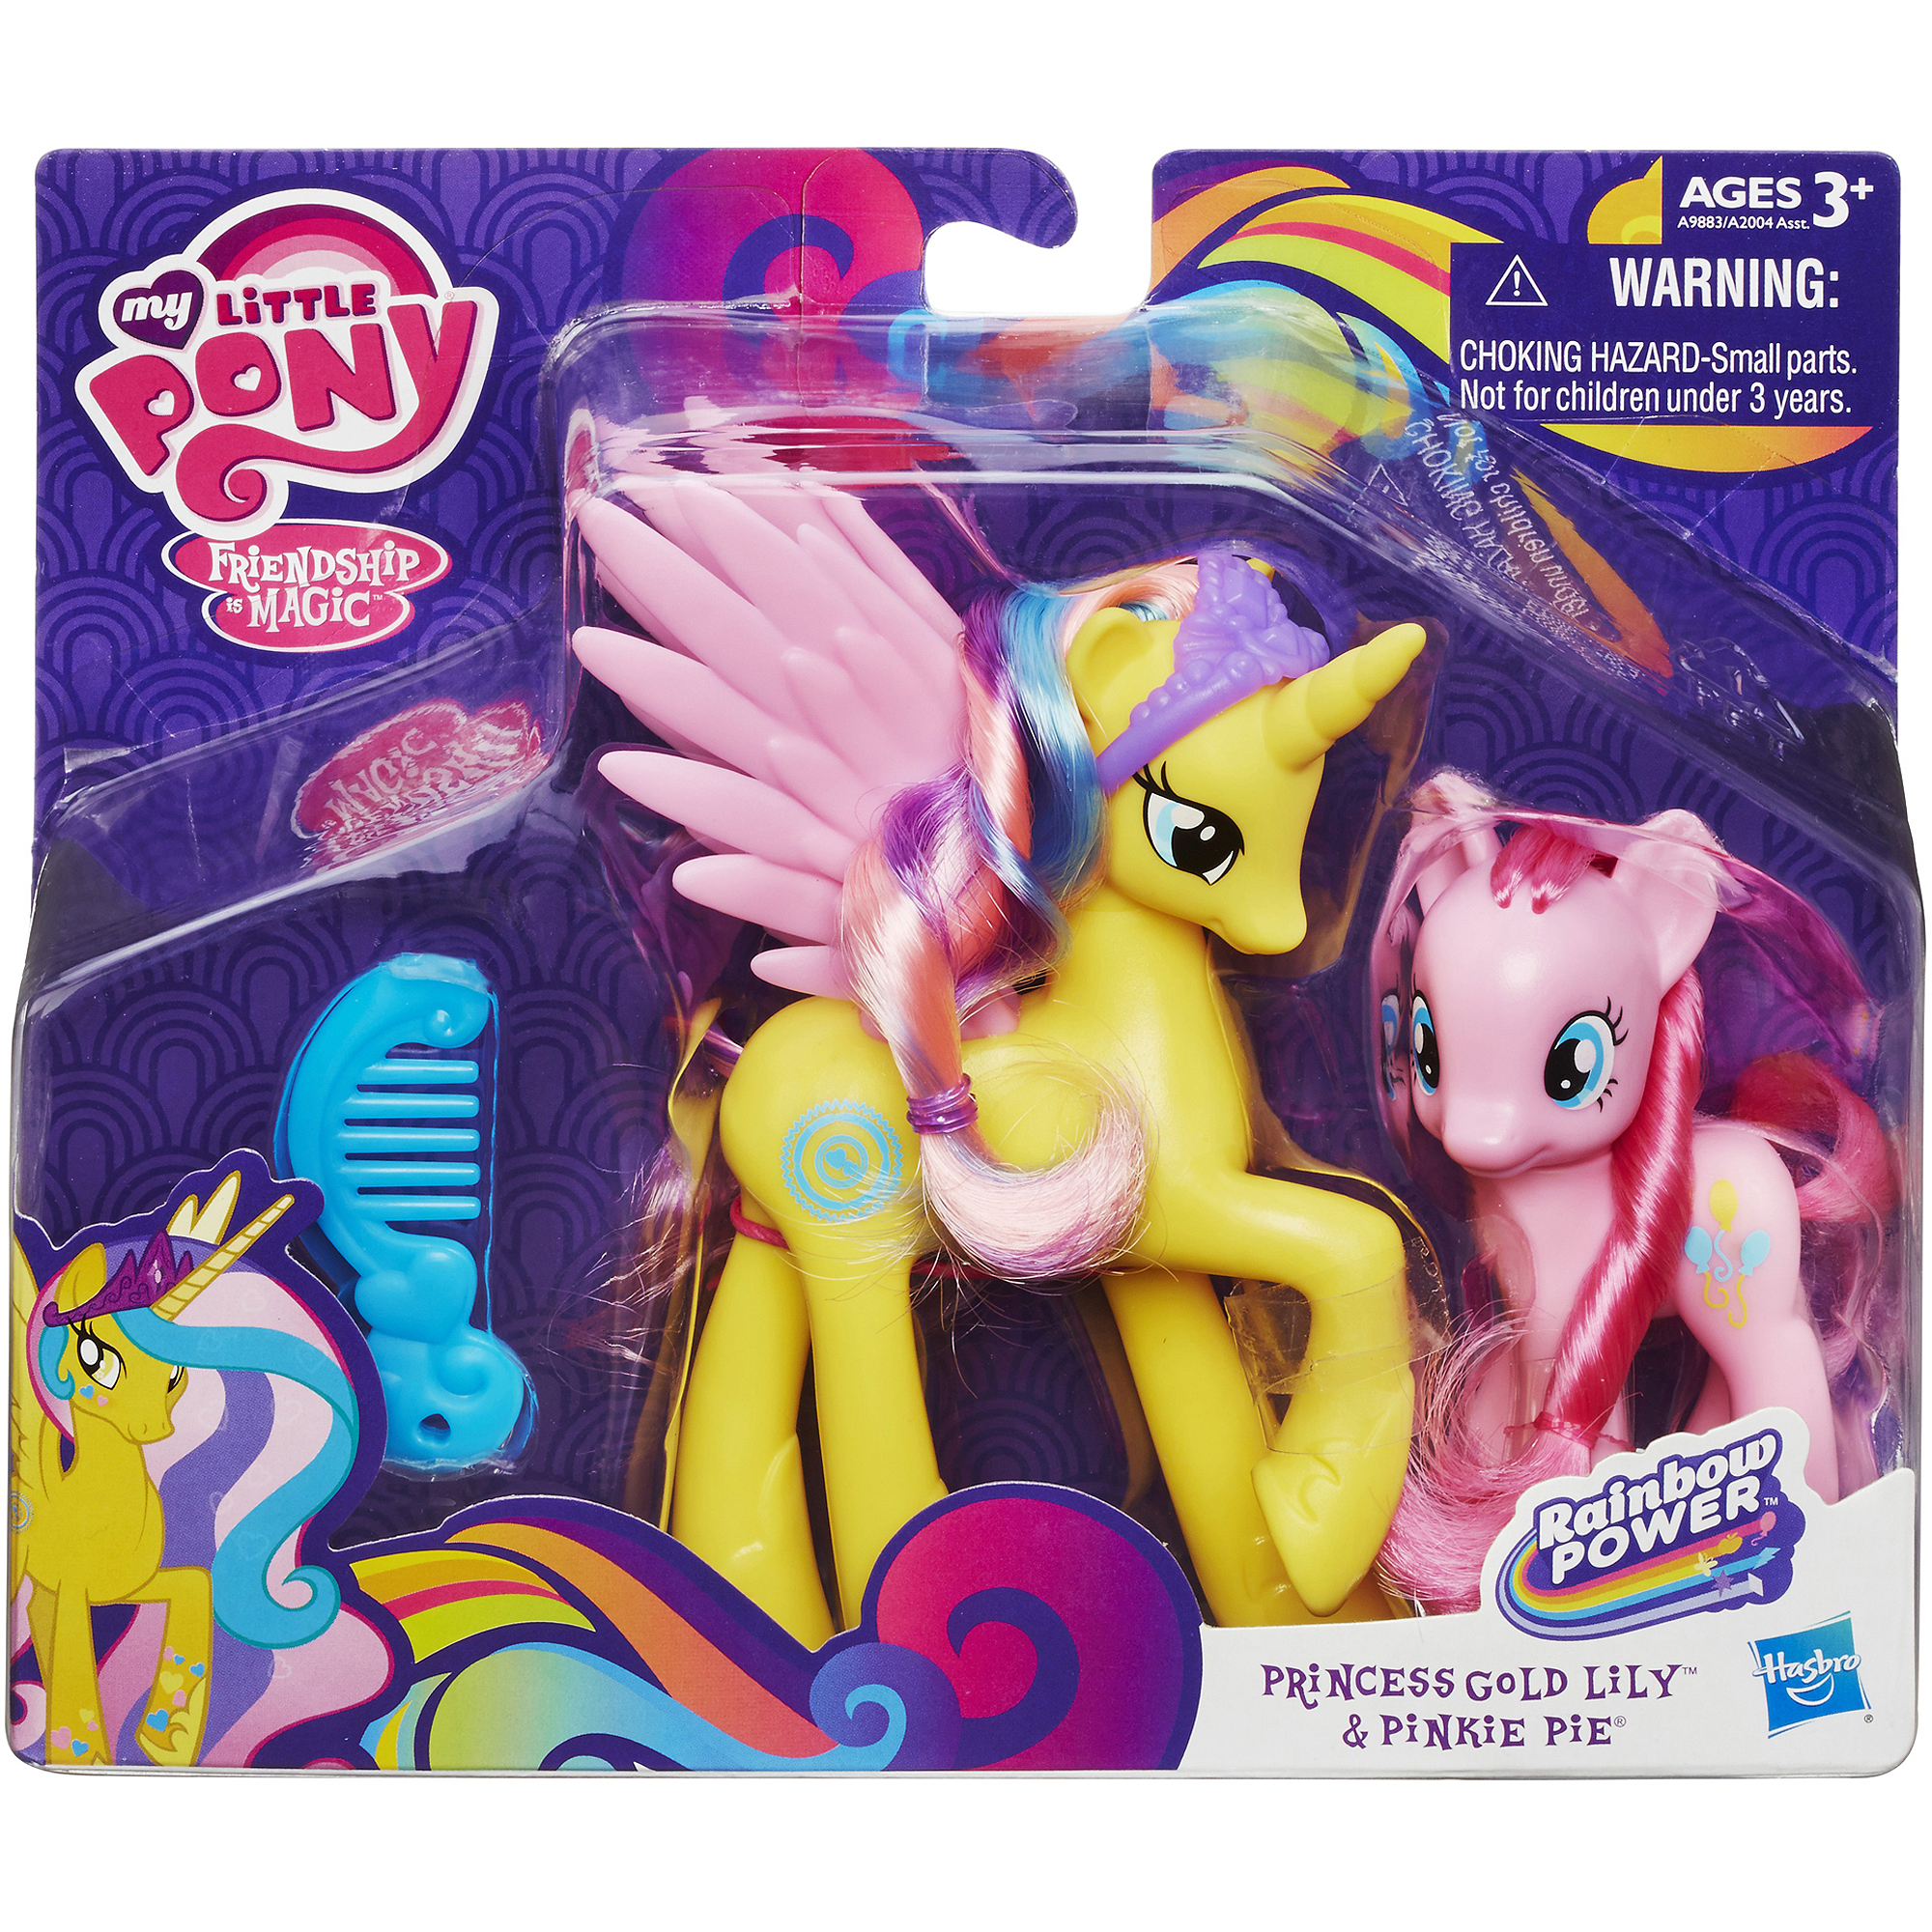 My Little Pony Rainbow Power - Princess Gold Lily and Pinkie Pie Figures - image 2 of 2